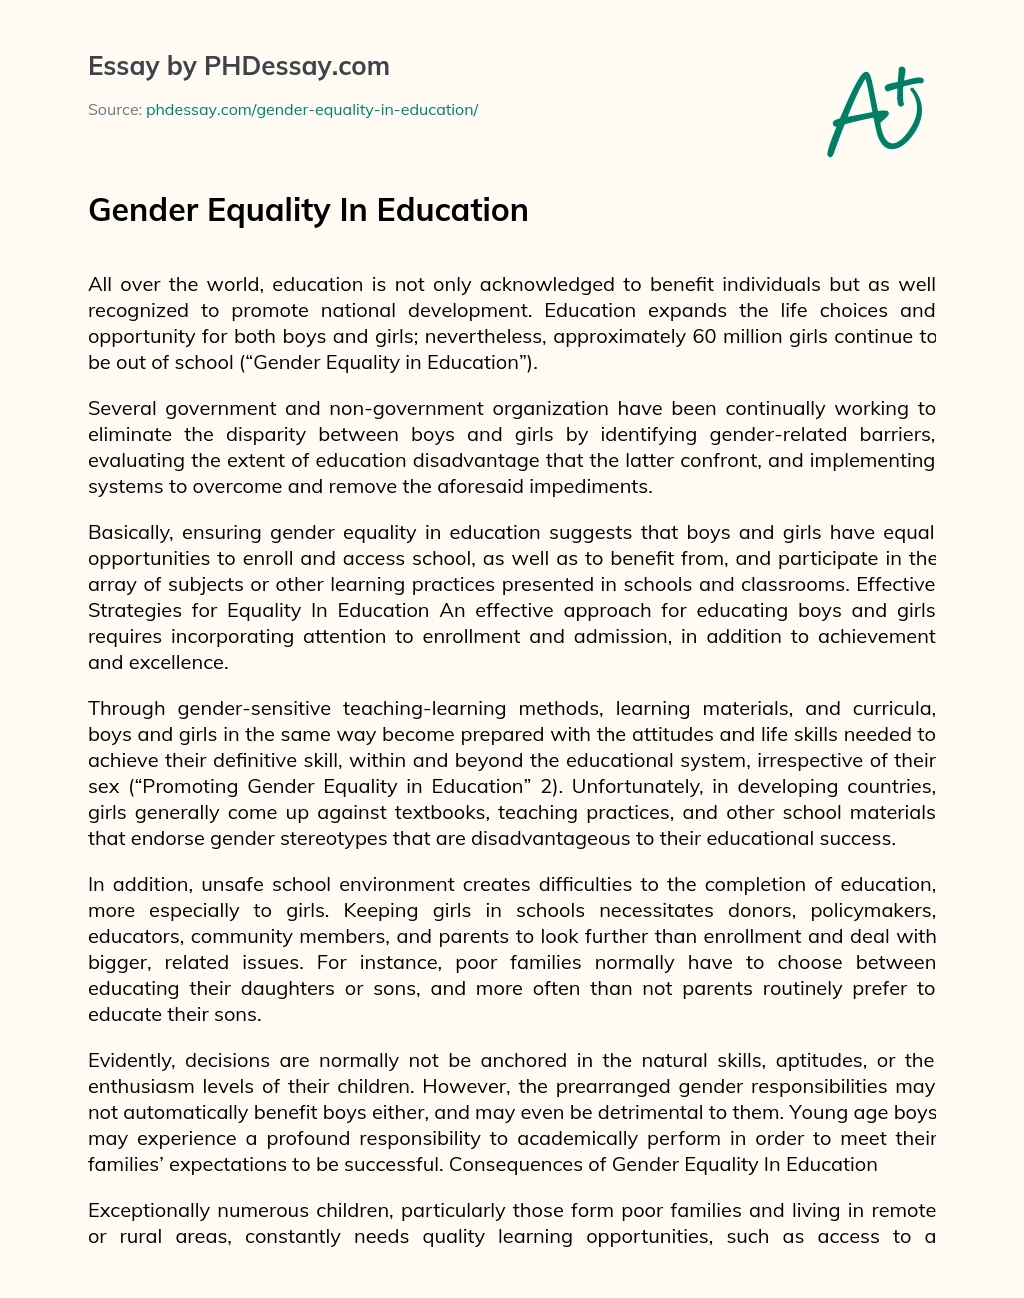 Gender Equality In Education essay